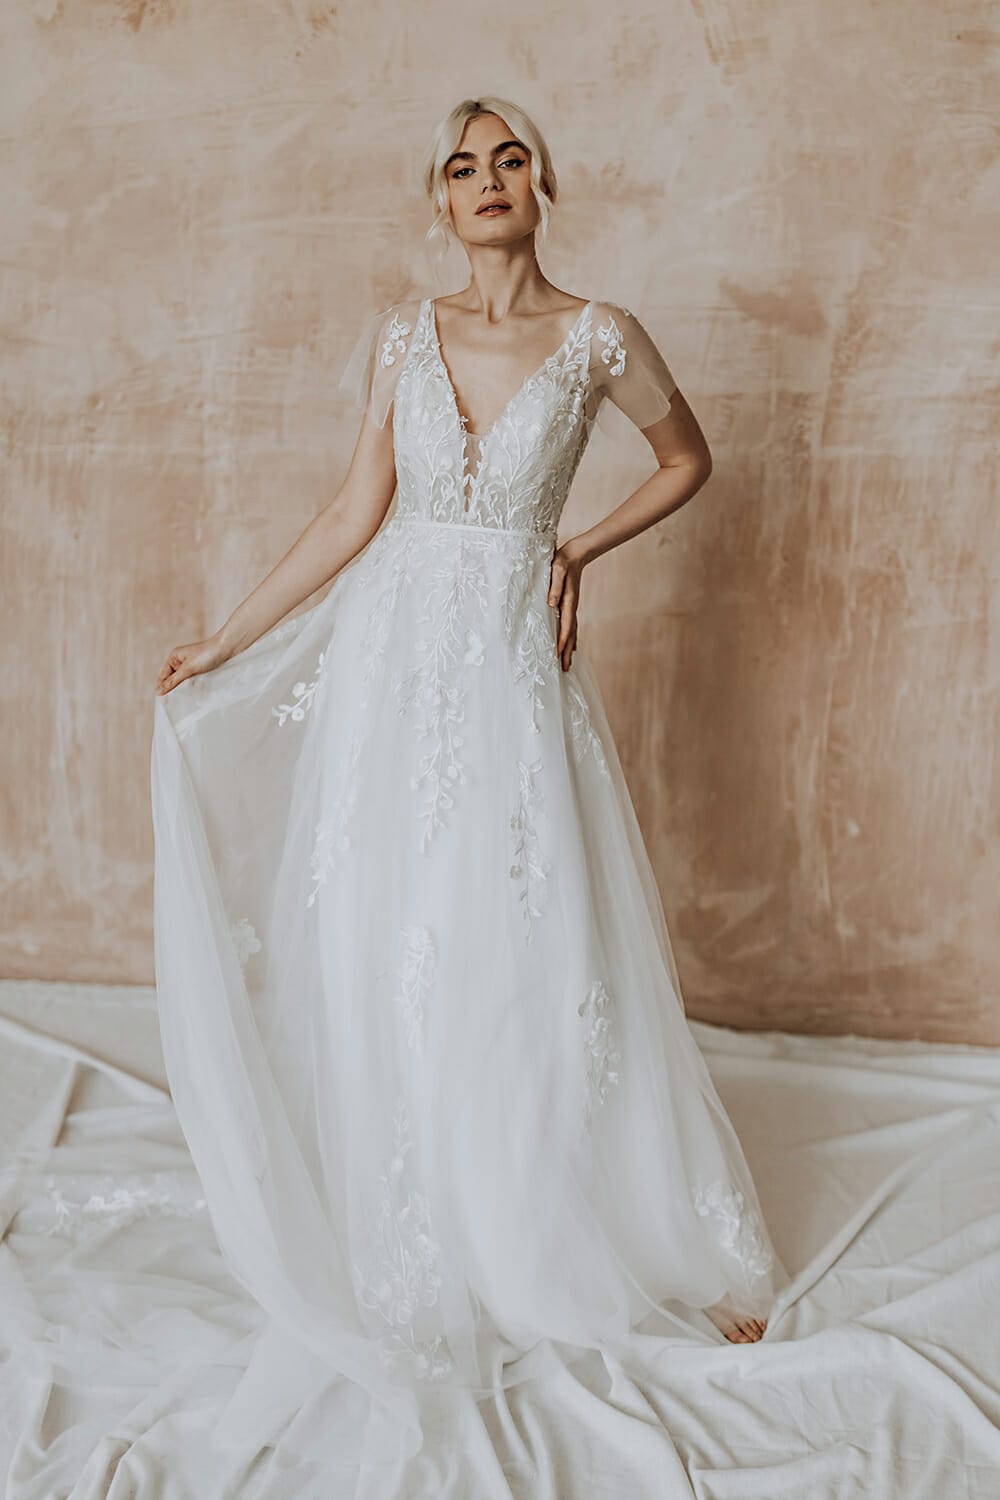 Modern Boho Wedding Dress With Removable Sleeves And Overskirt | Bridal ...